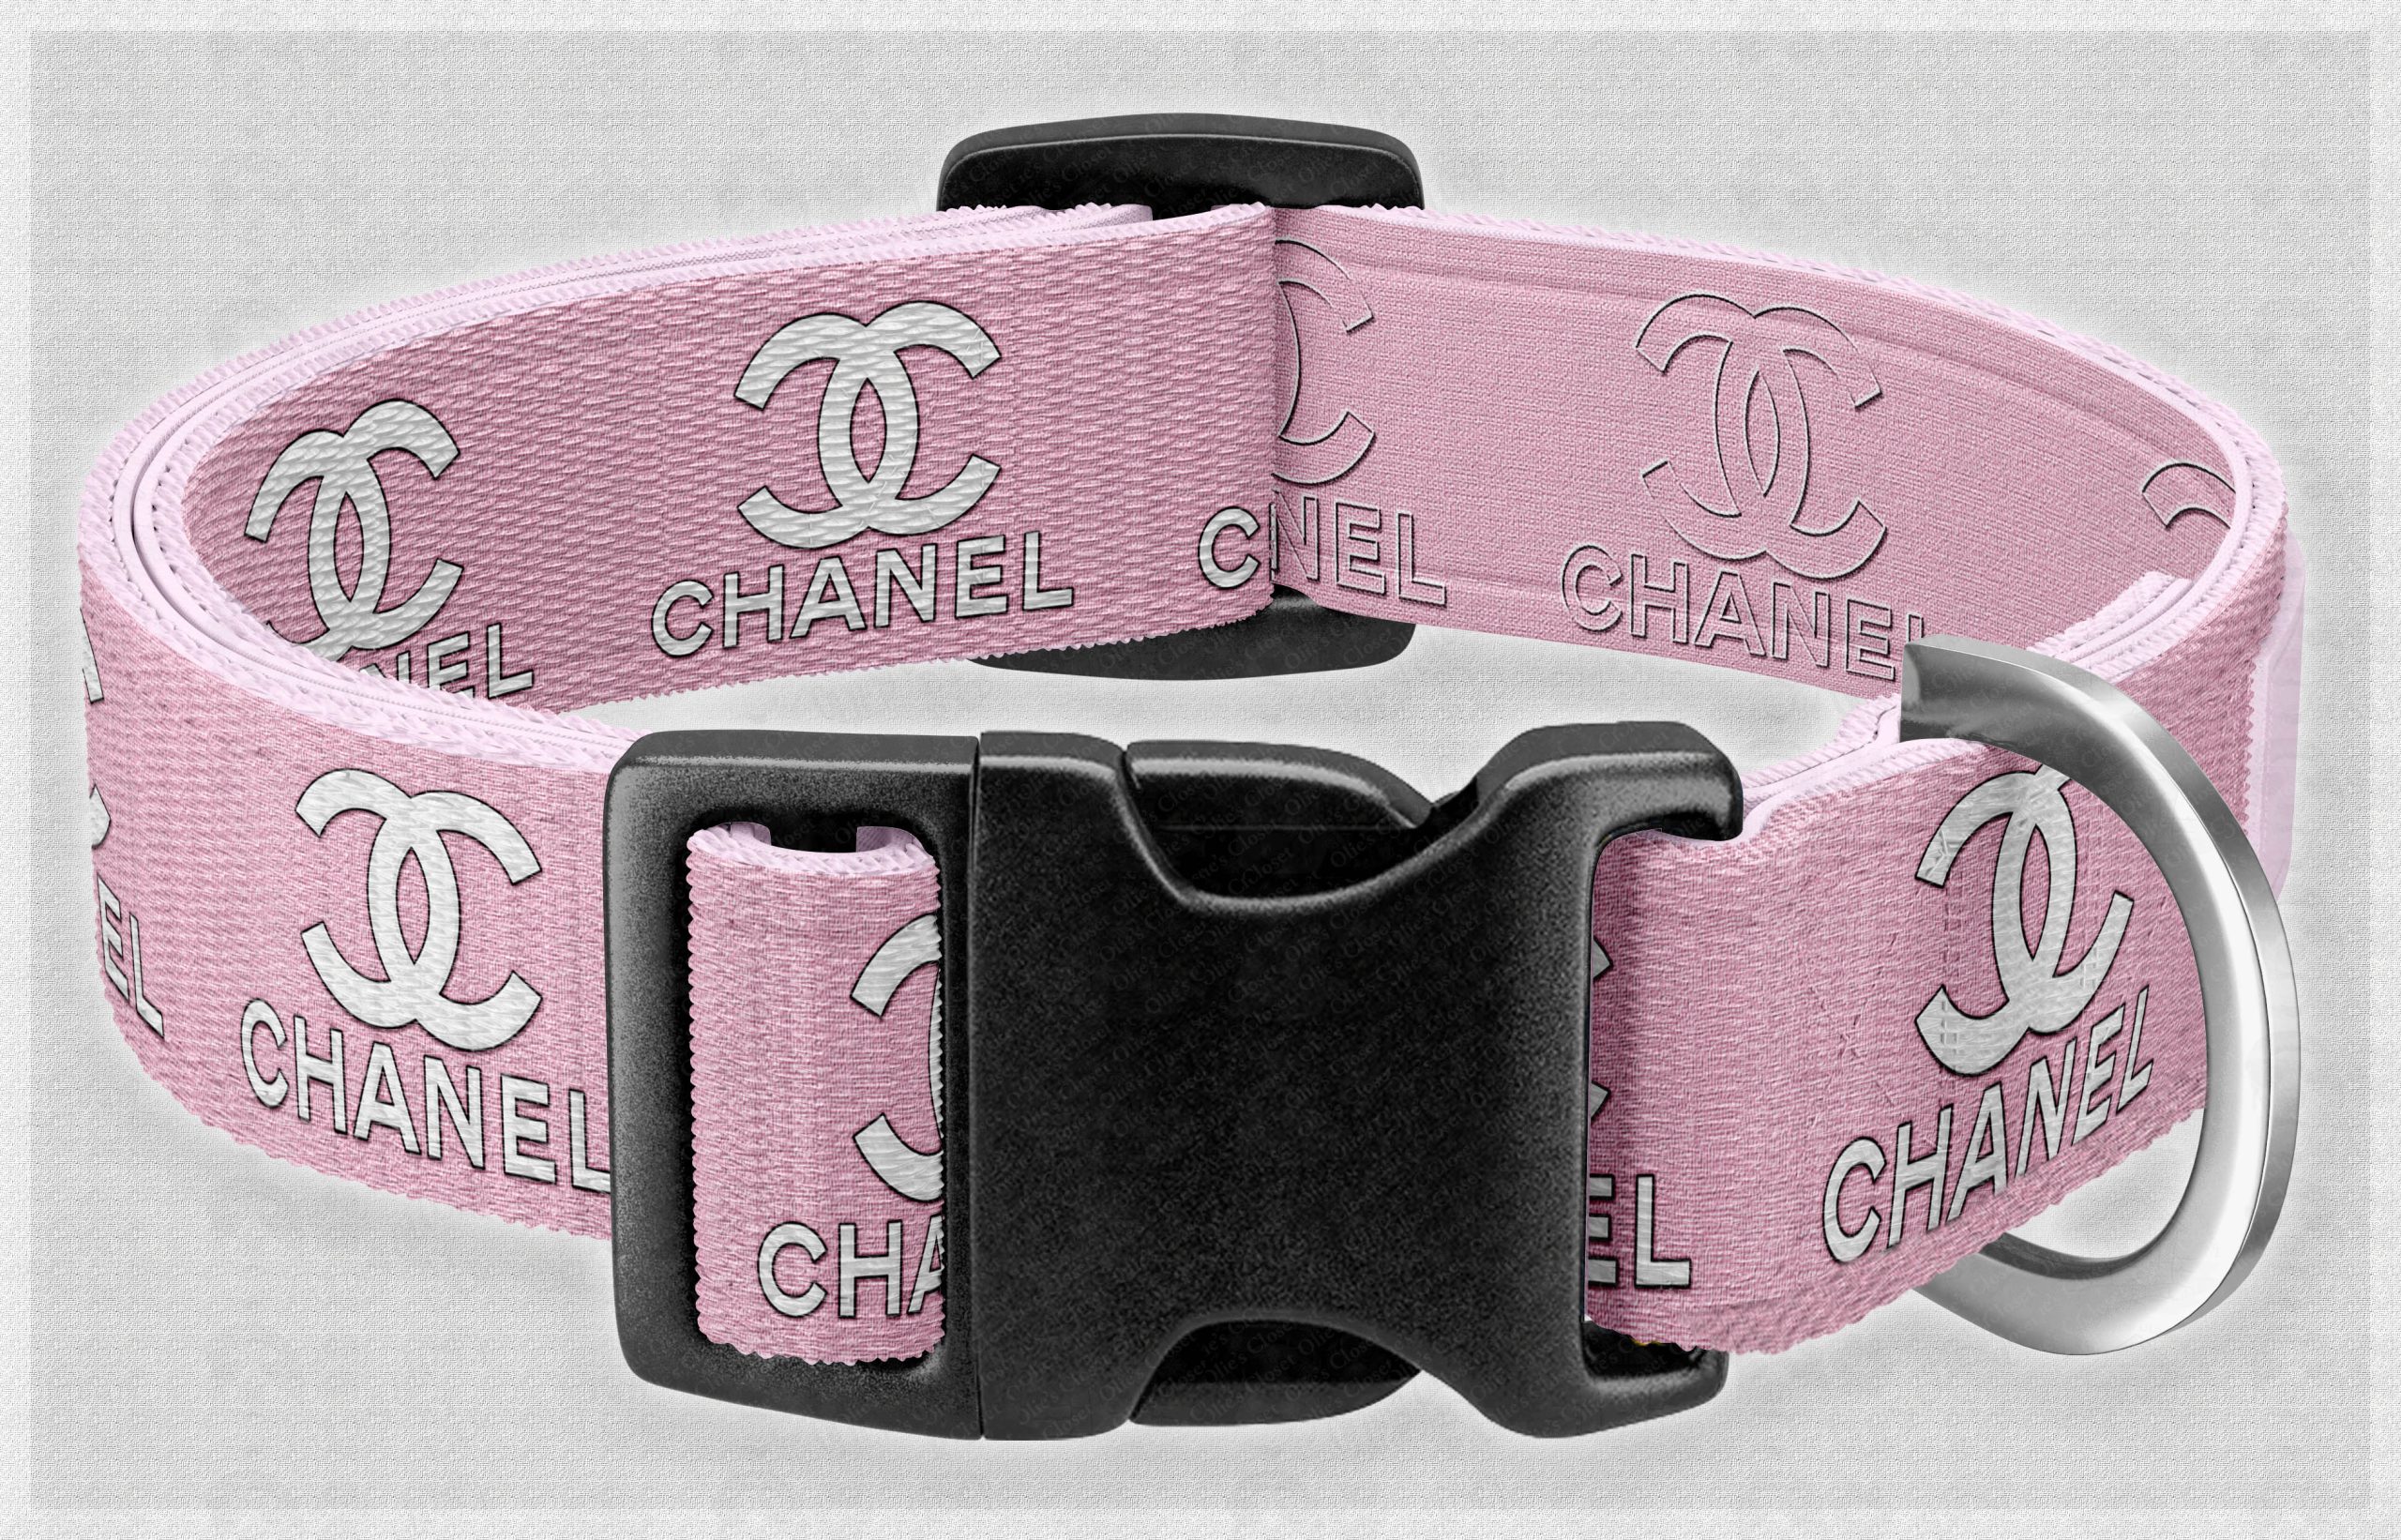 Chanel style collar for cats - Shop pocounpoco Collars & Leashes